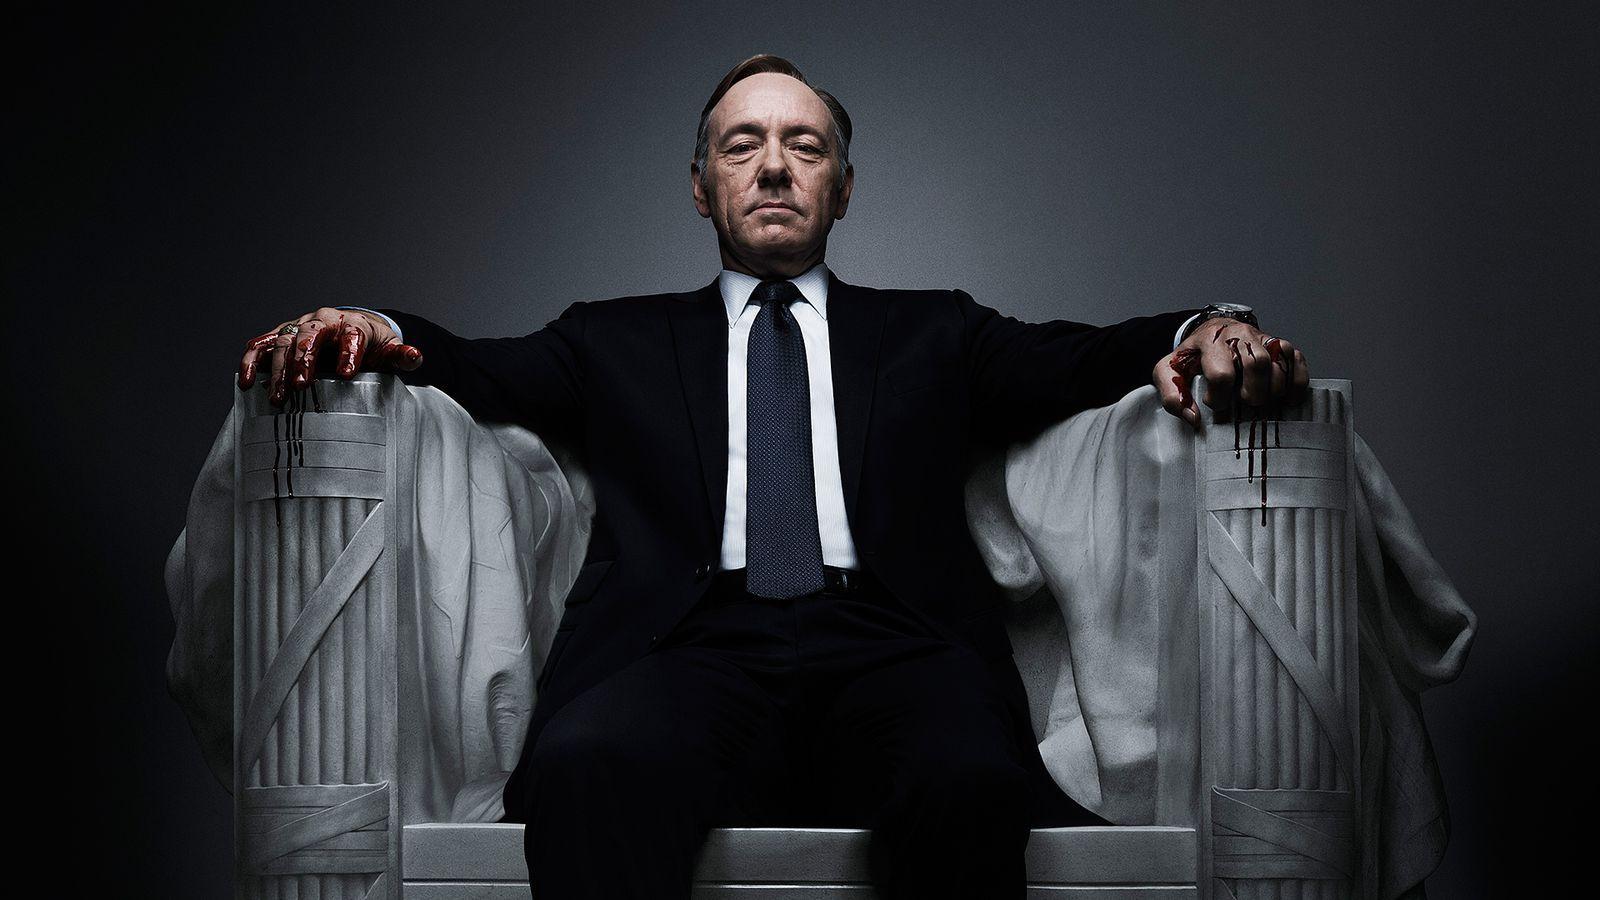 House of Cards' season six has been suspended indefinitely